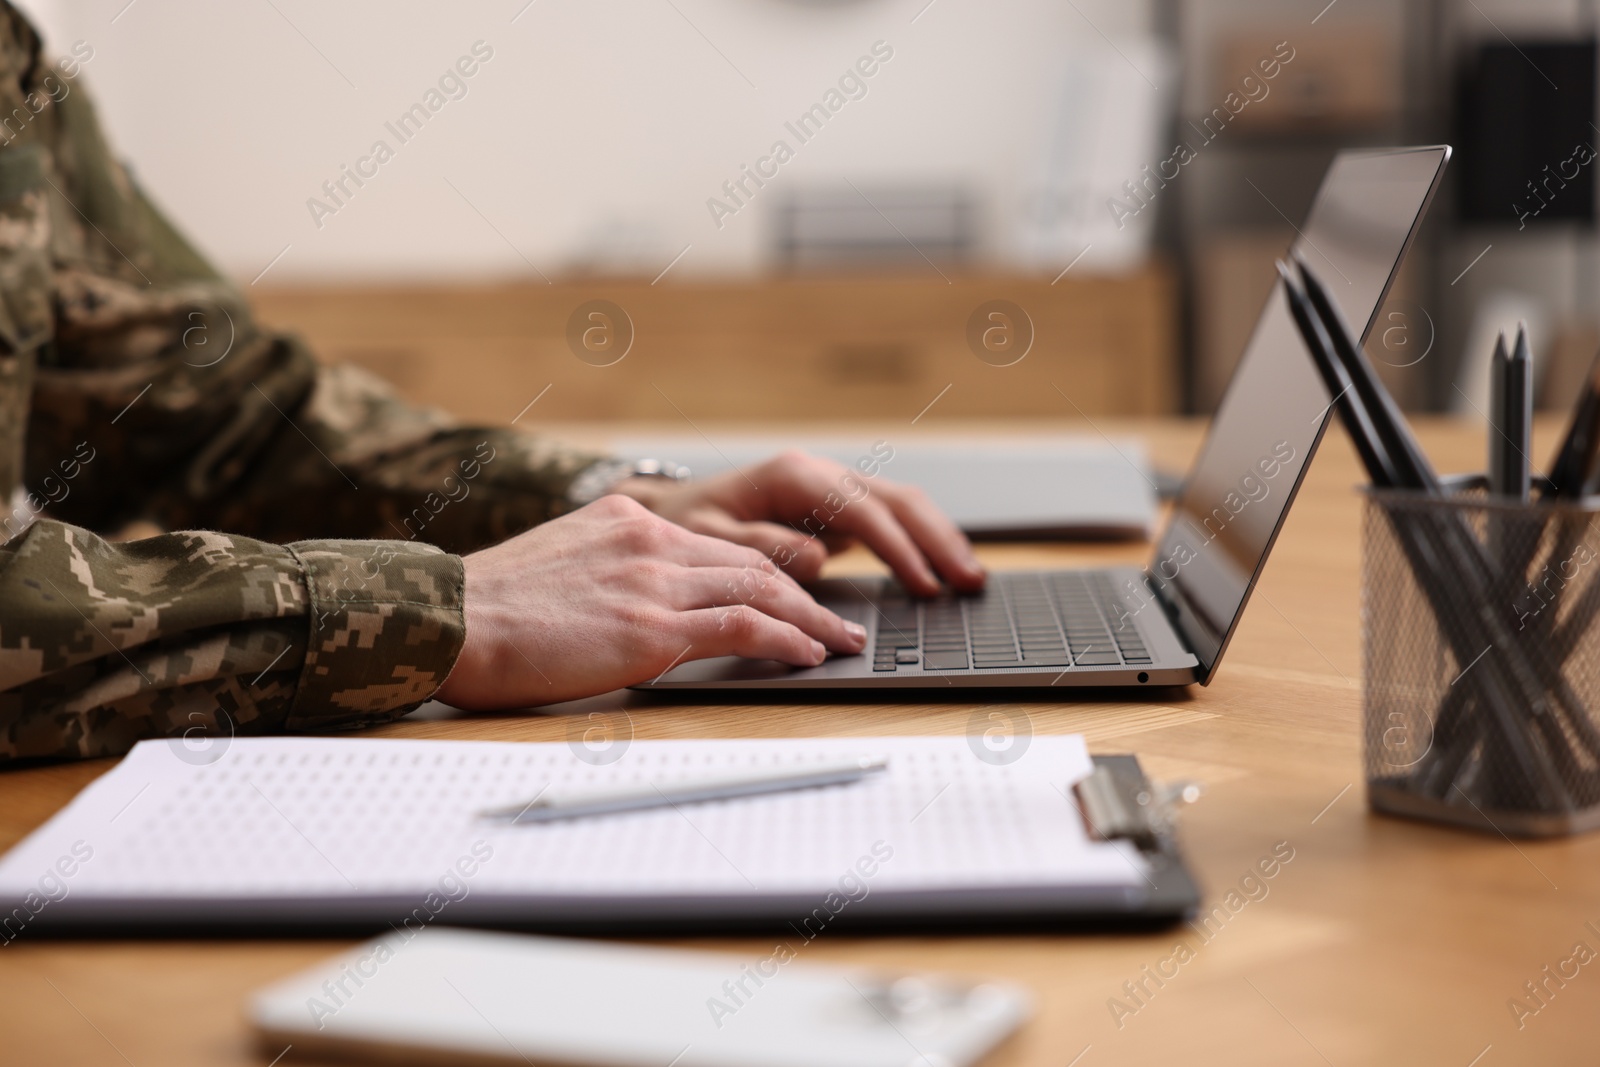 Photo of Military service. Soldier working with laptop at wooden table indoors, closeup